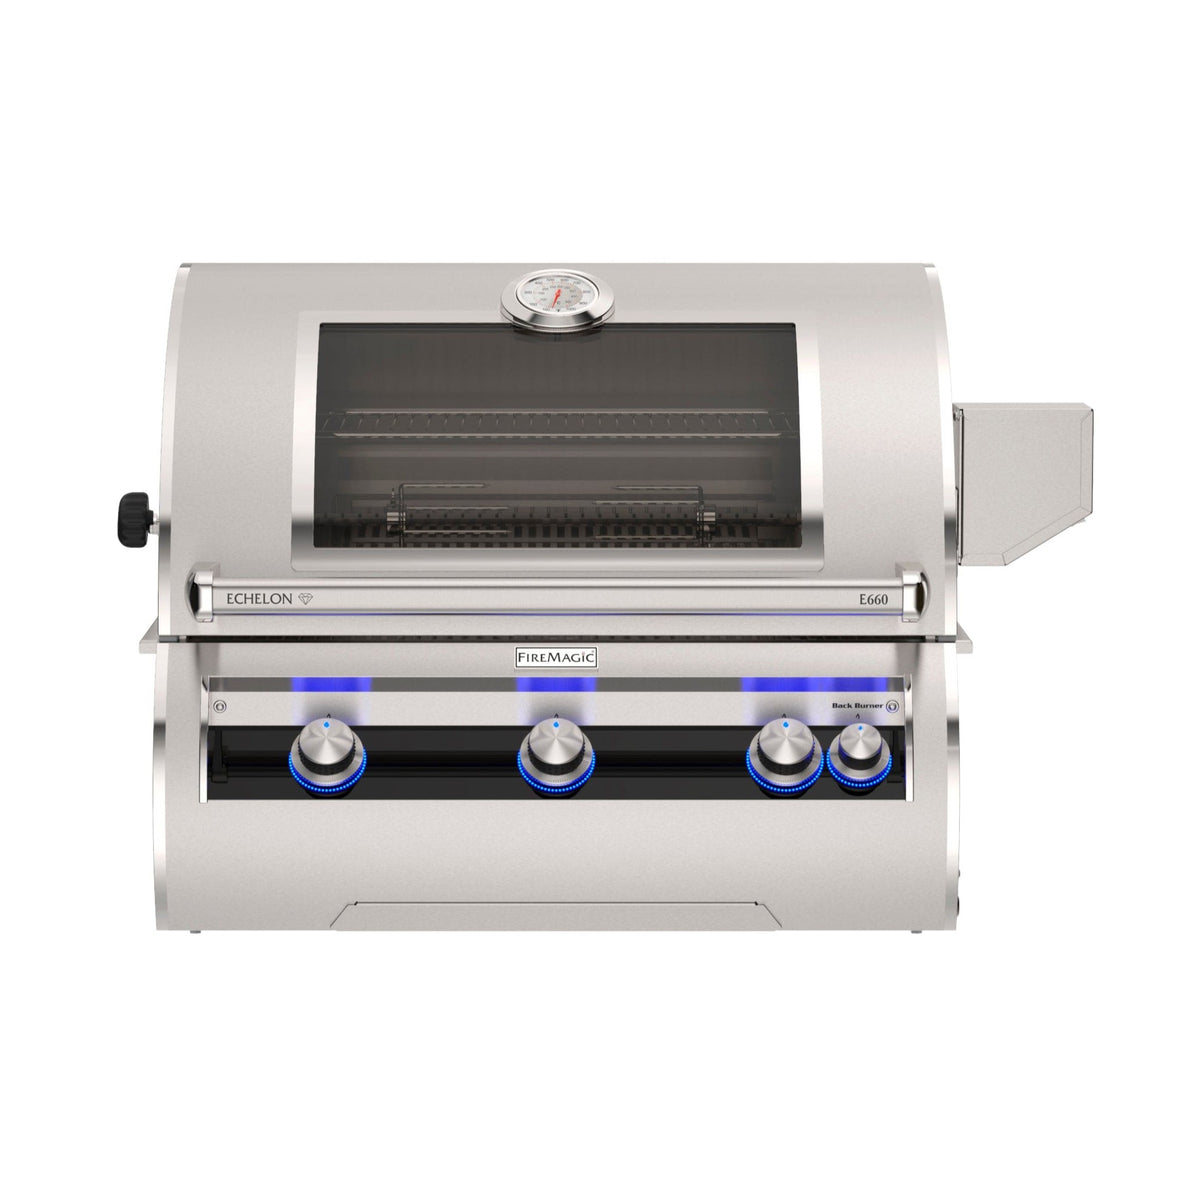 Firemagic Grills Fire Magic Echelon Diamond E660i Built-In Grill with Rotisserie and Analog Thermometer / E660i-9EAN(P), E660i-9LAN(P), E660i-9EAN(P)-W, E660i-9LAN(P)-W